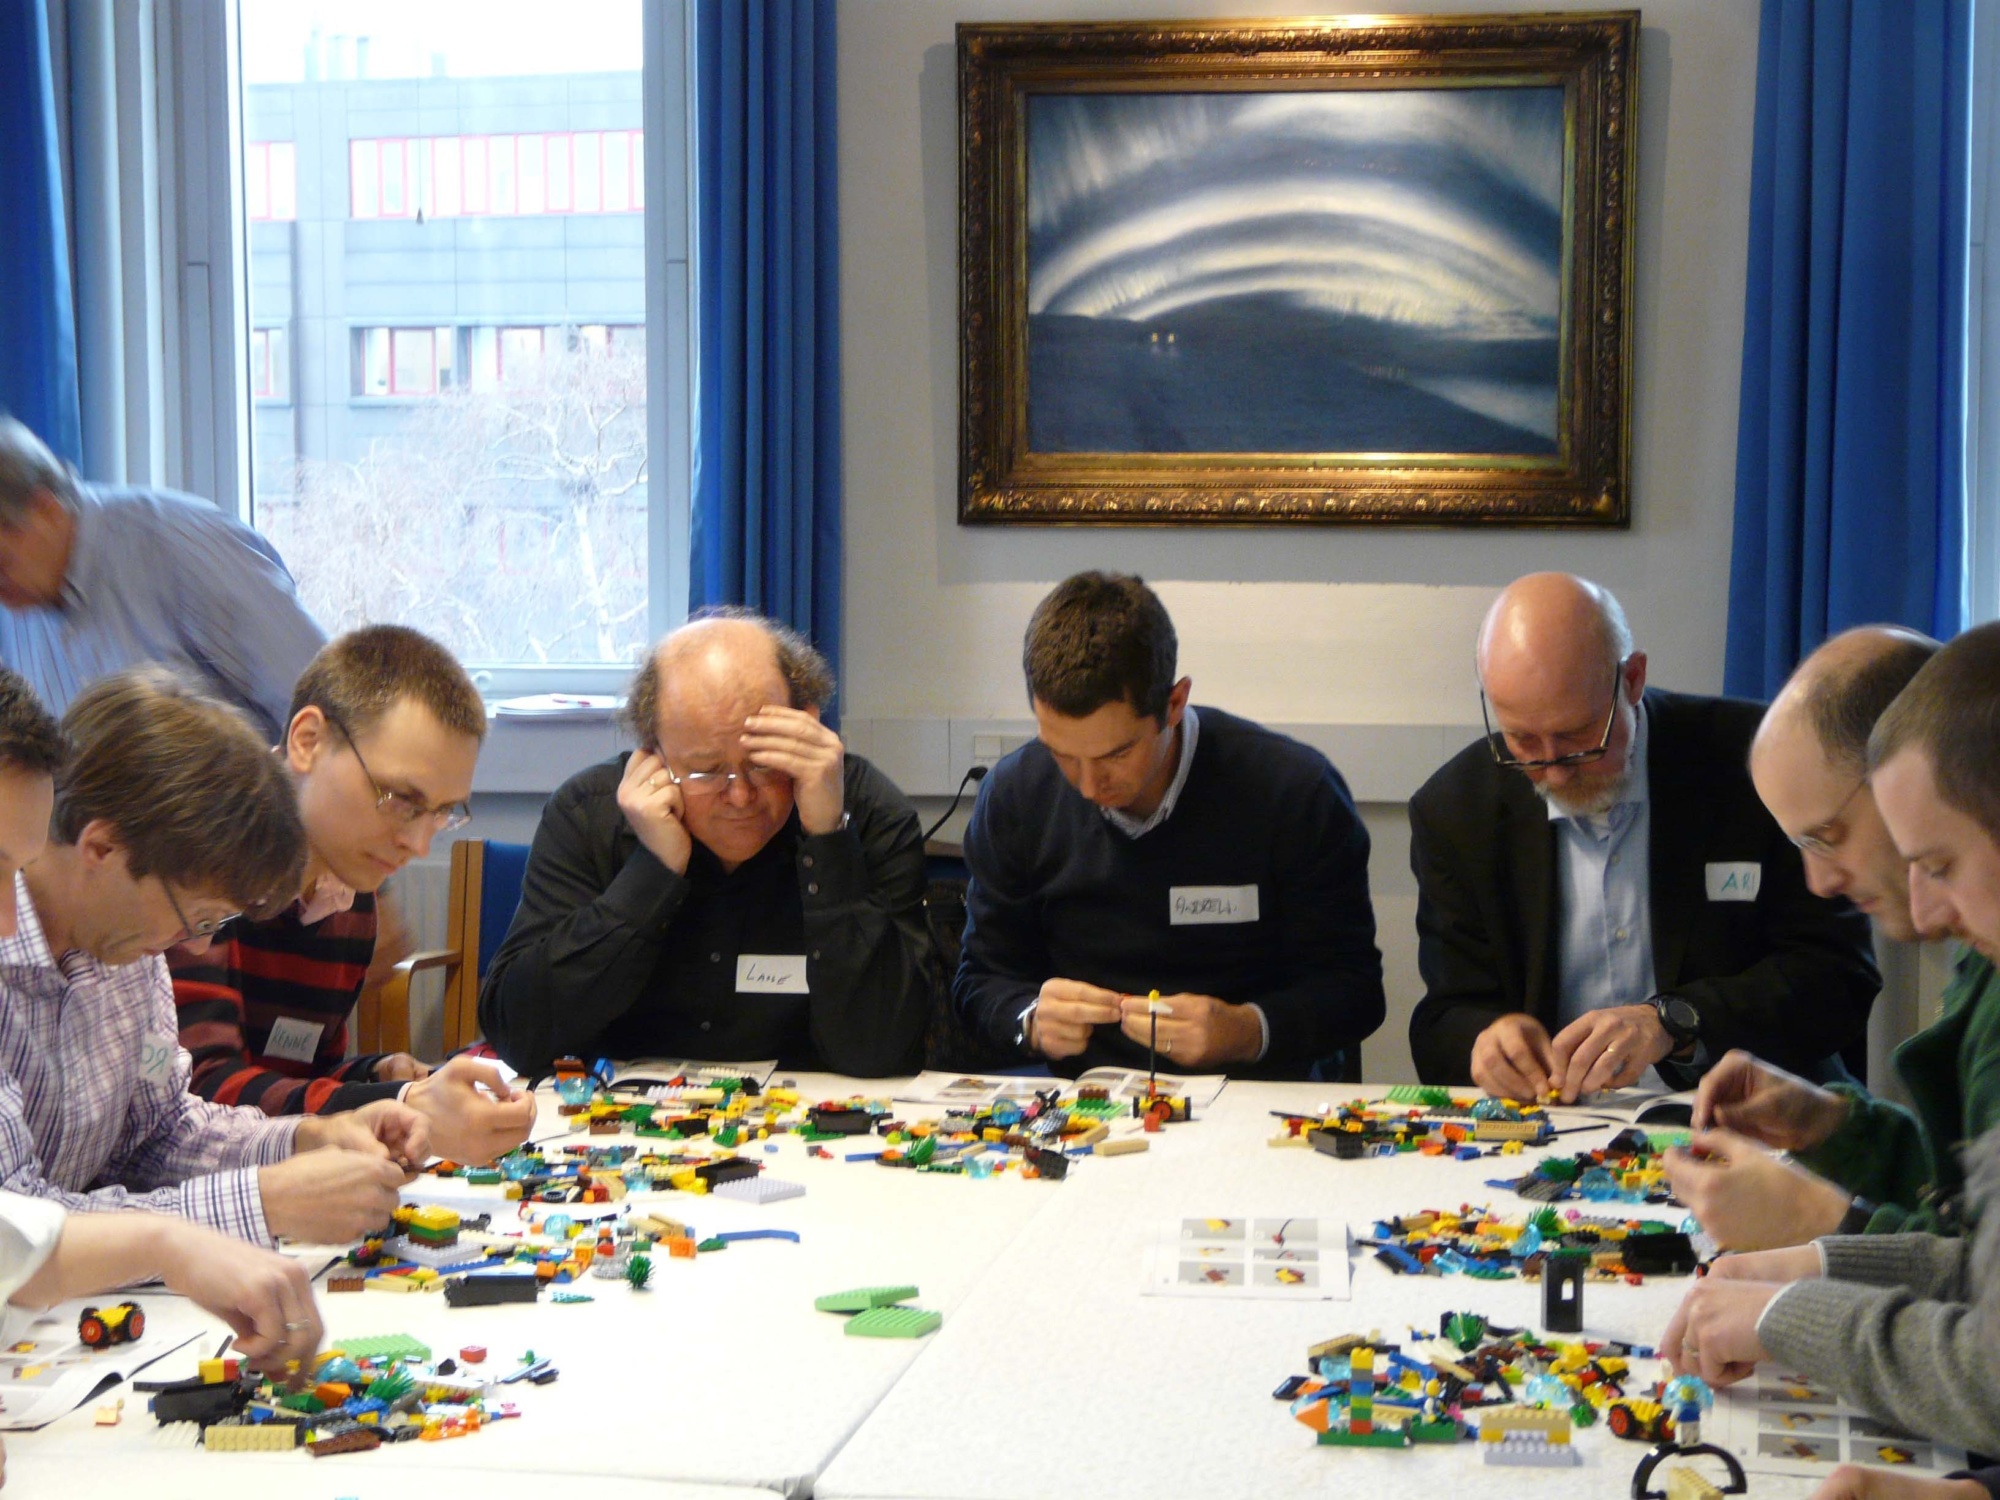 LEGO® SERIOUS PLAY® modeling building begins